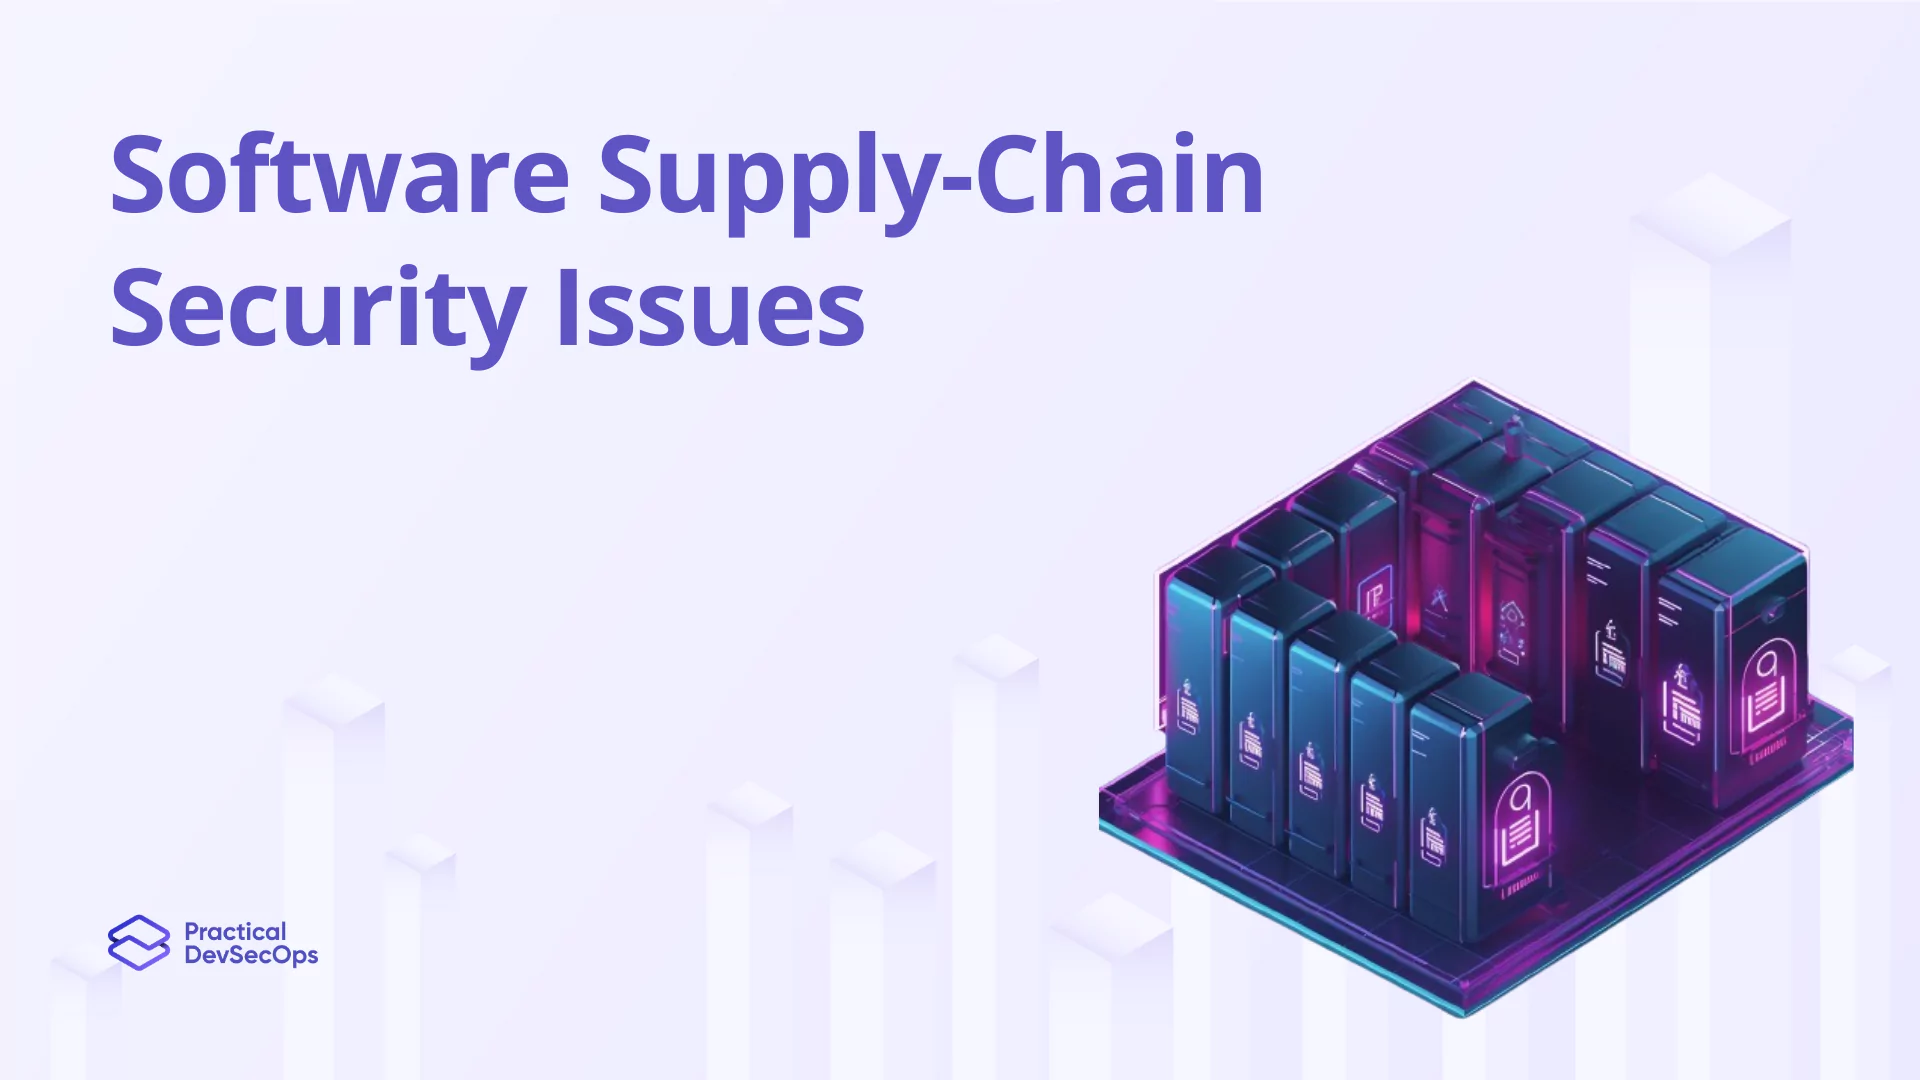 Software Supply-Chain Security Issues and Countermeasures